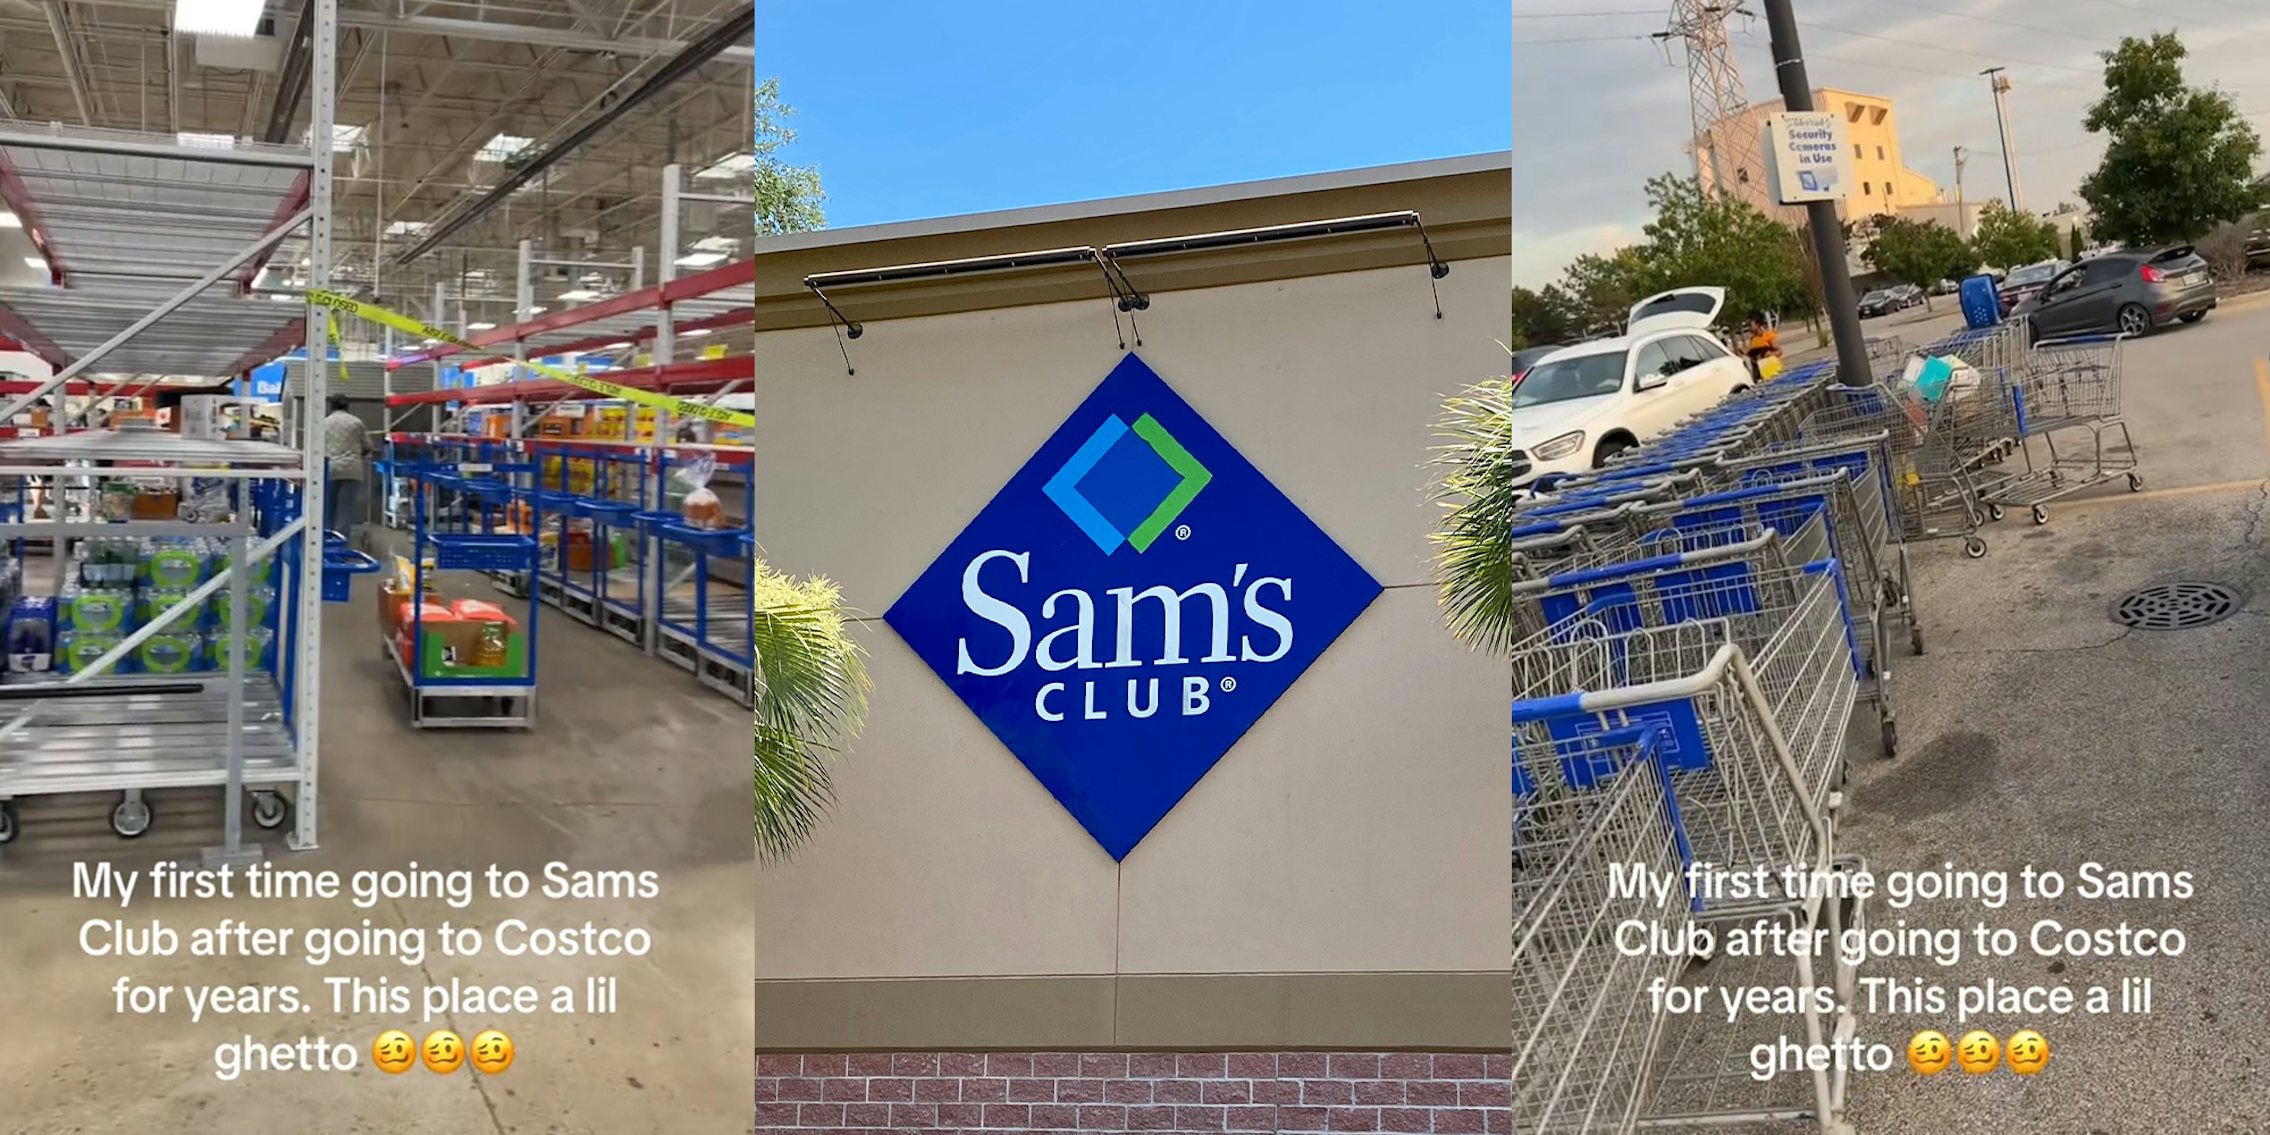 Sam's Club Empty Racks; Sam's Club Store Front; Carts filled with garbage